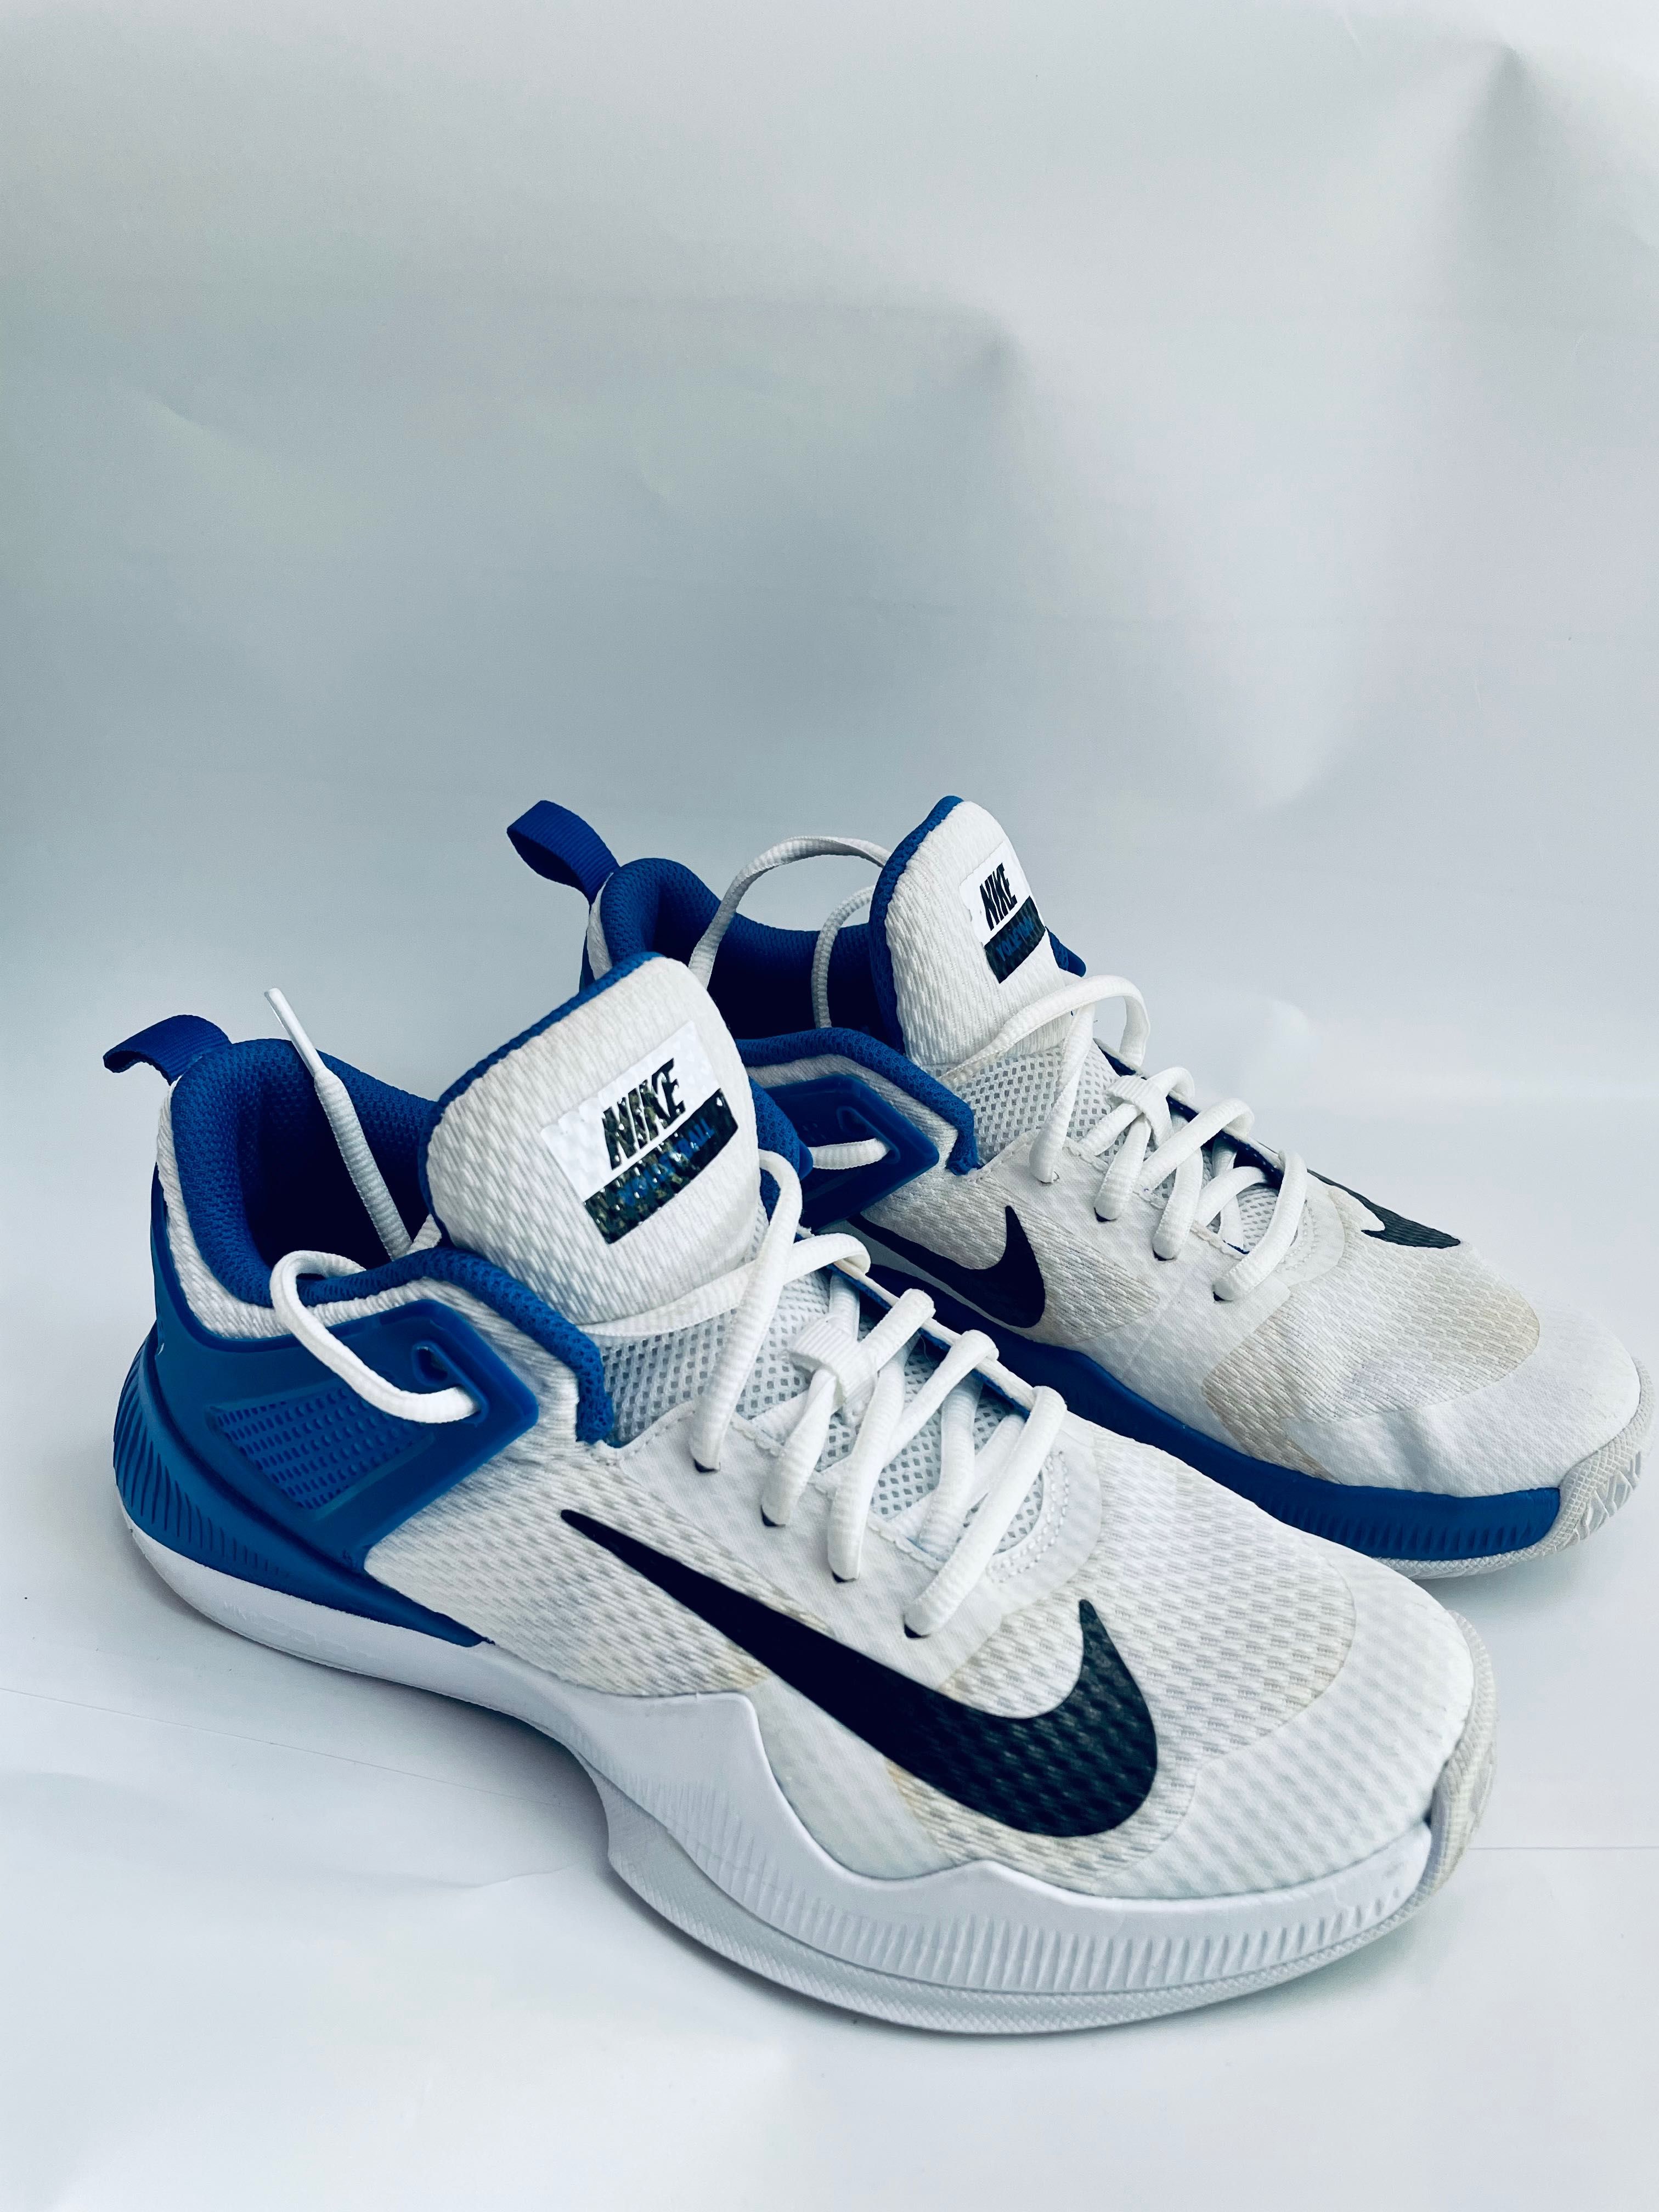 Nike Women's Zoom Hyperspace Volleyball Shoes - White/Black/Blue